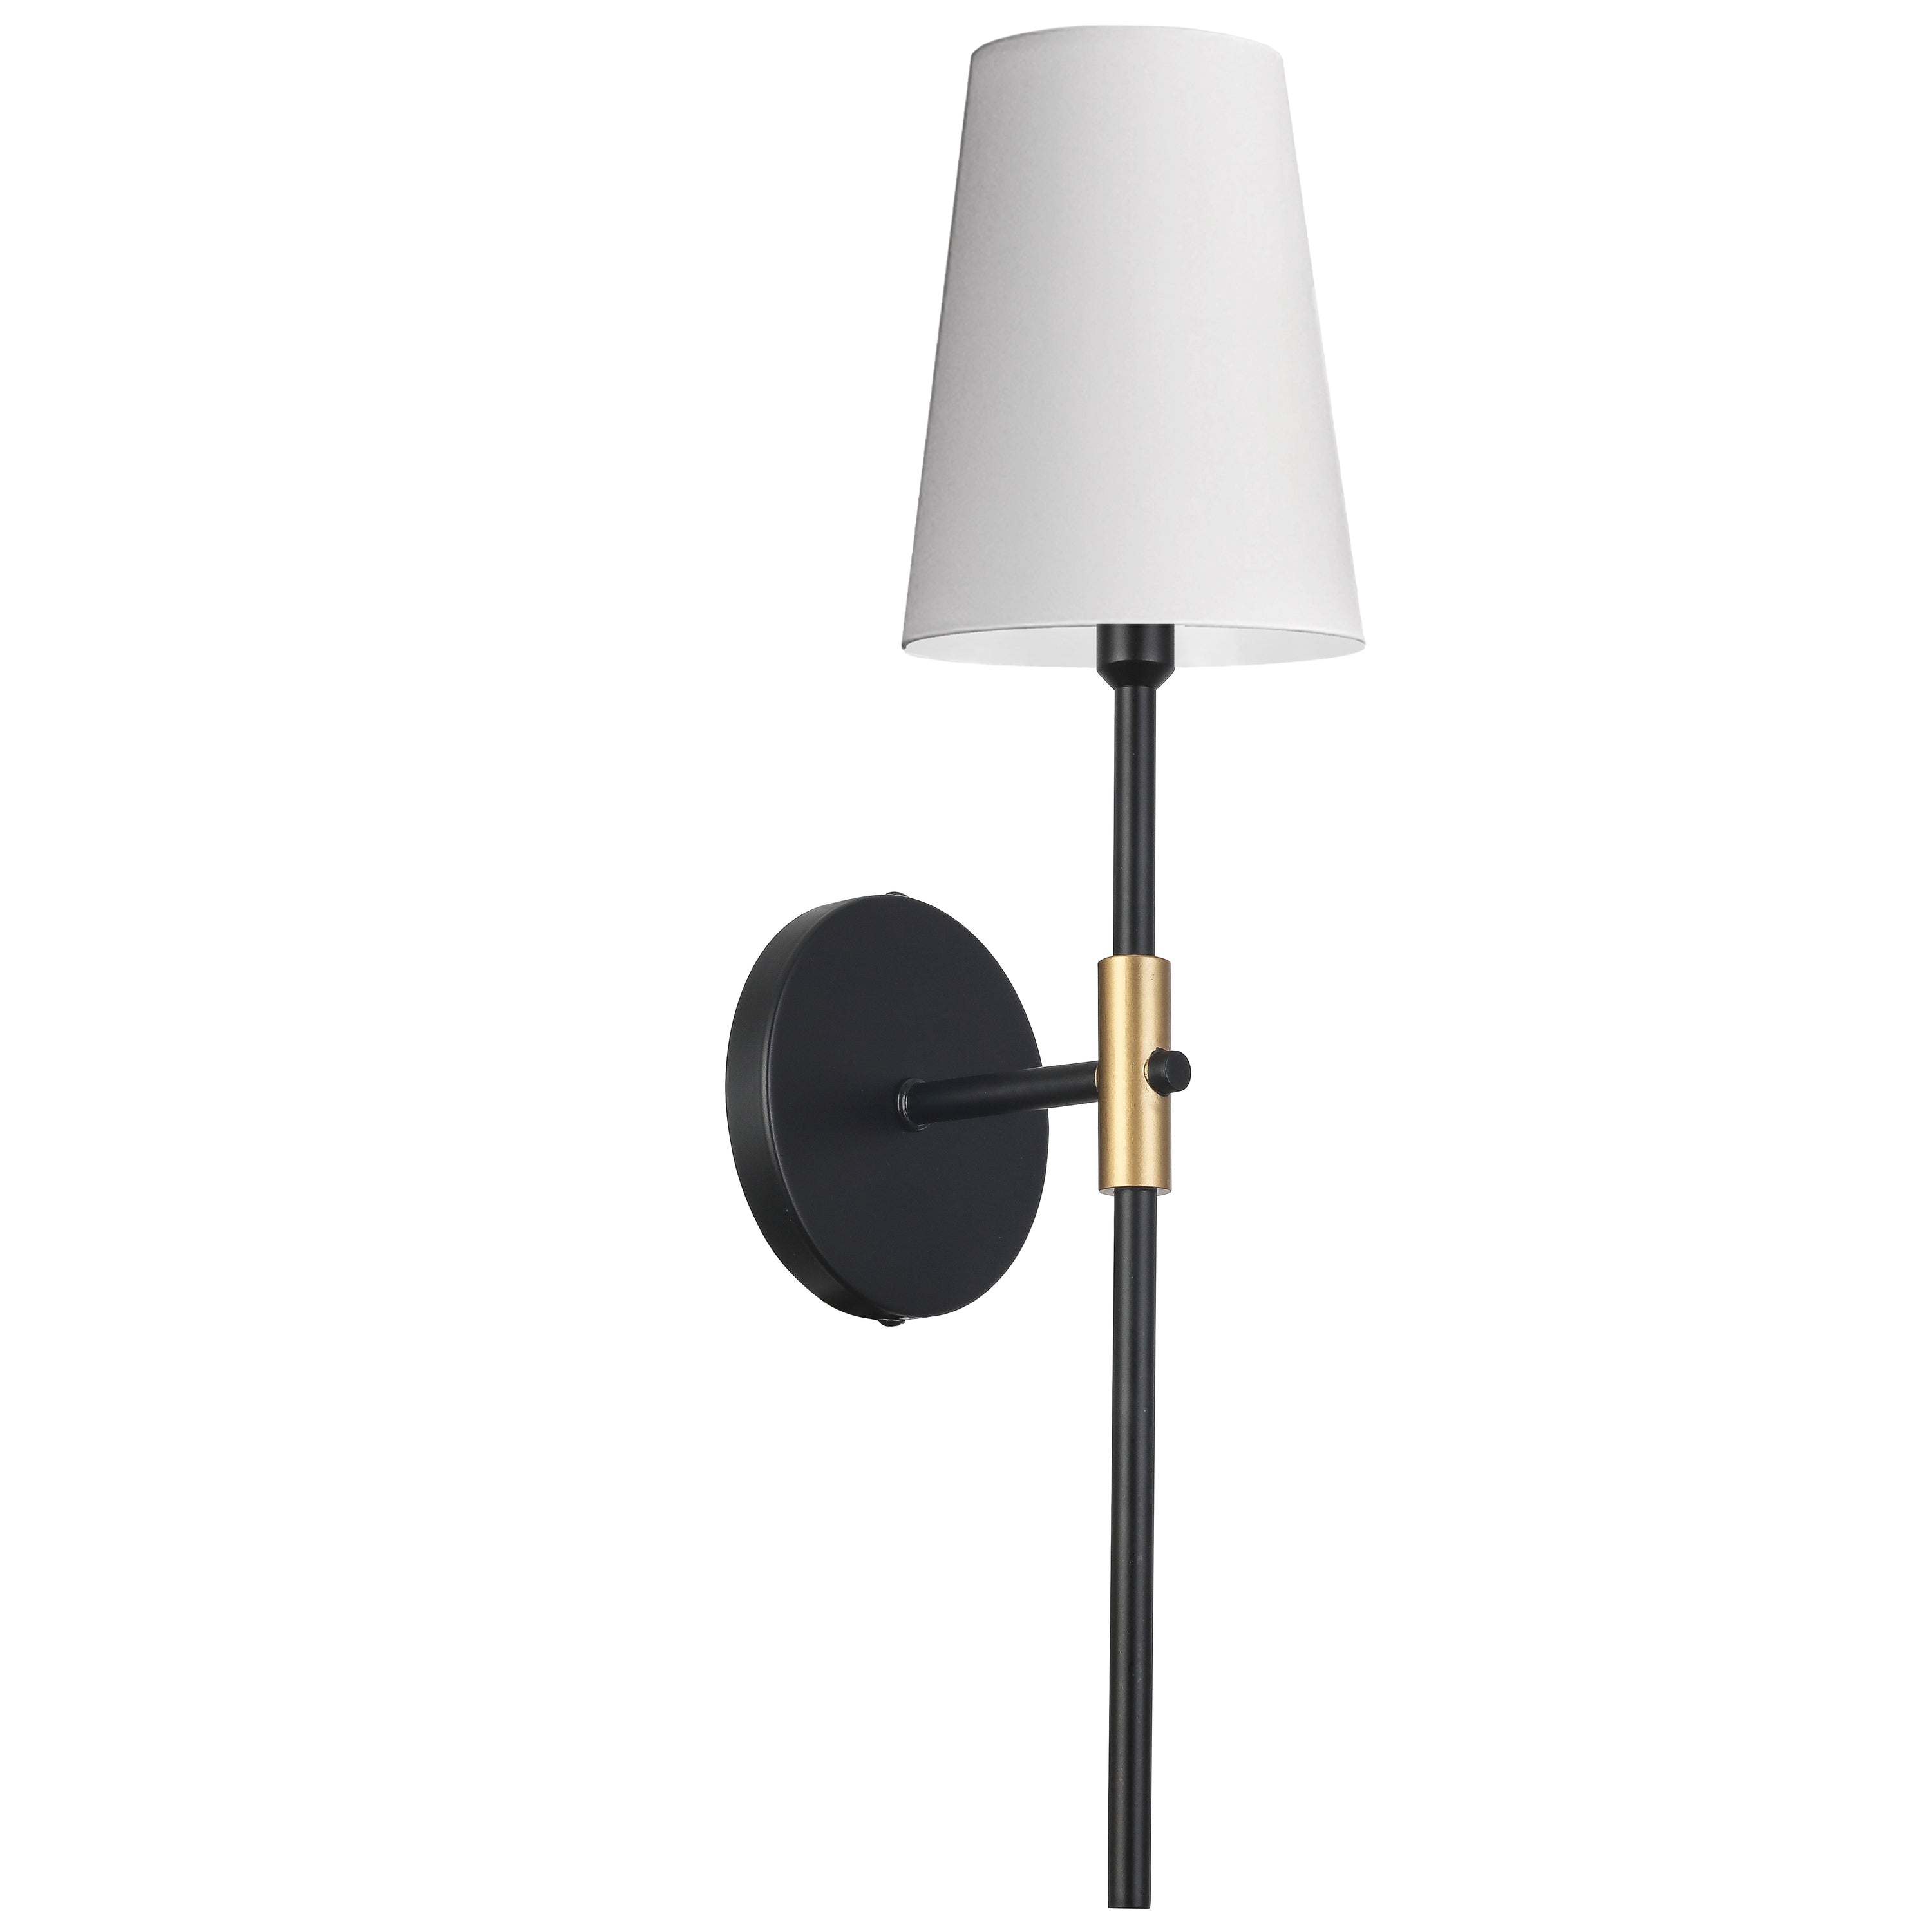 Dainolite CIN-211W-MB-AGB-790 1 Light Incandescent Wall Sconce, Satin Chrome, Matte Black & Aged Brass with White Shade